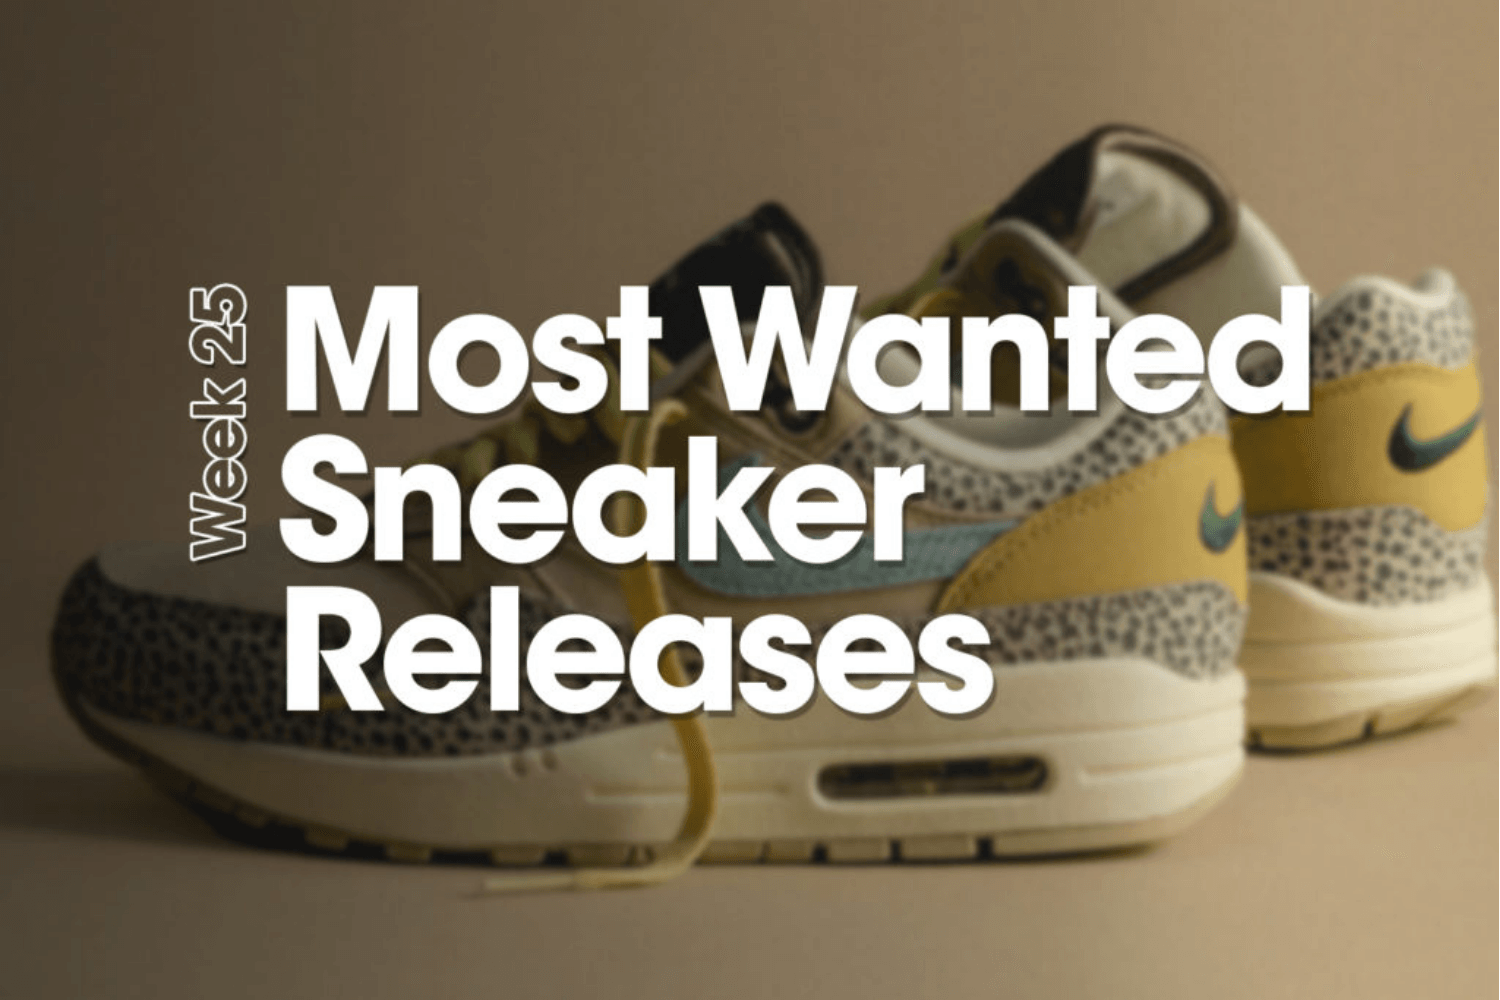 Most Wanted Sneaker Releases - Woche 25